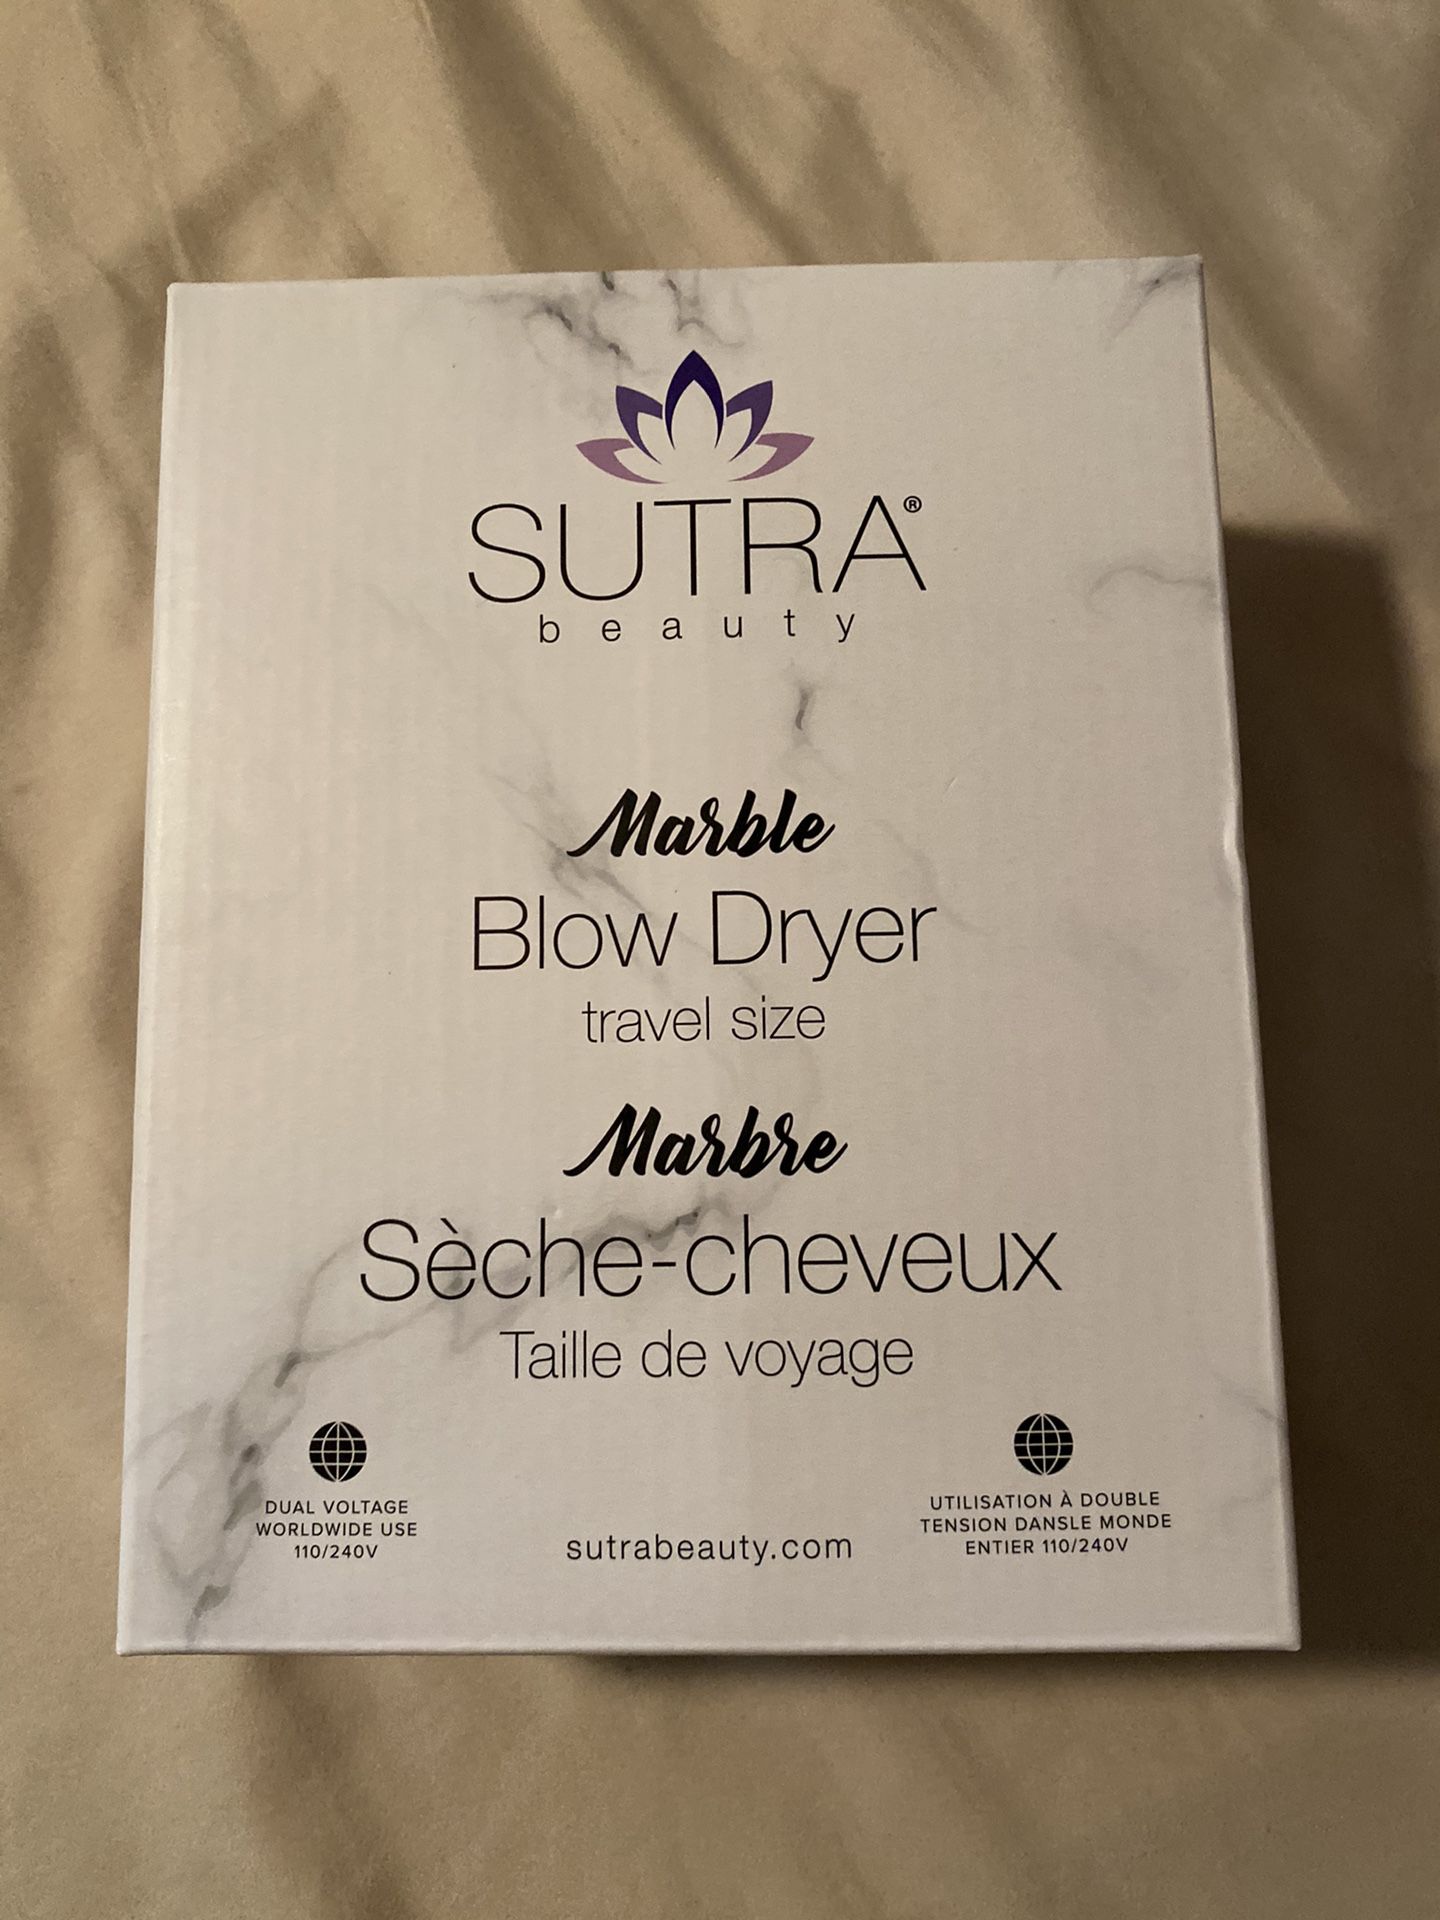 Sutra beauty travel size blow dryer